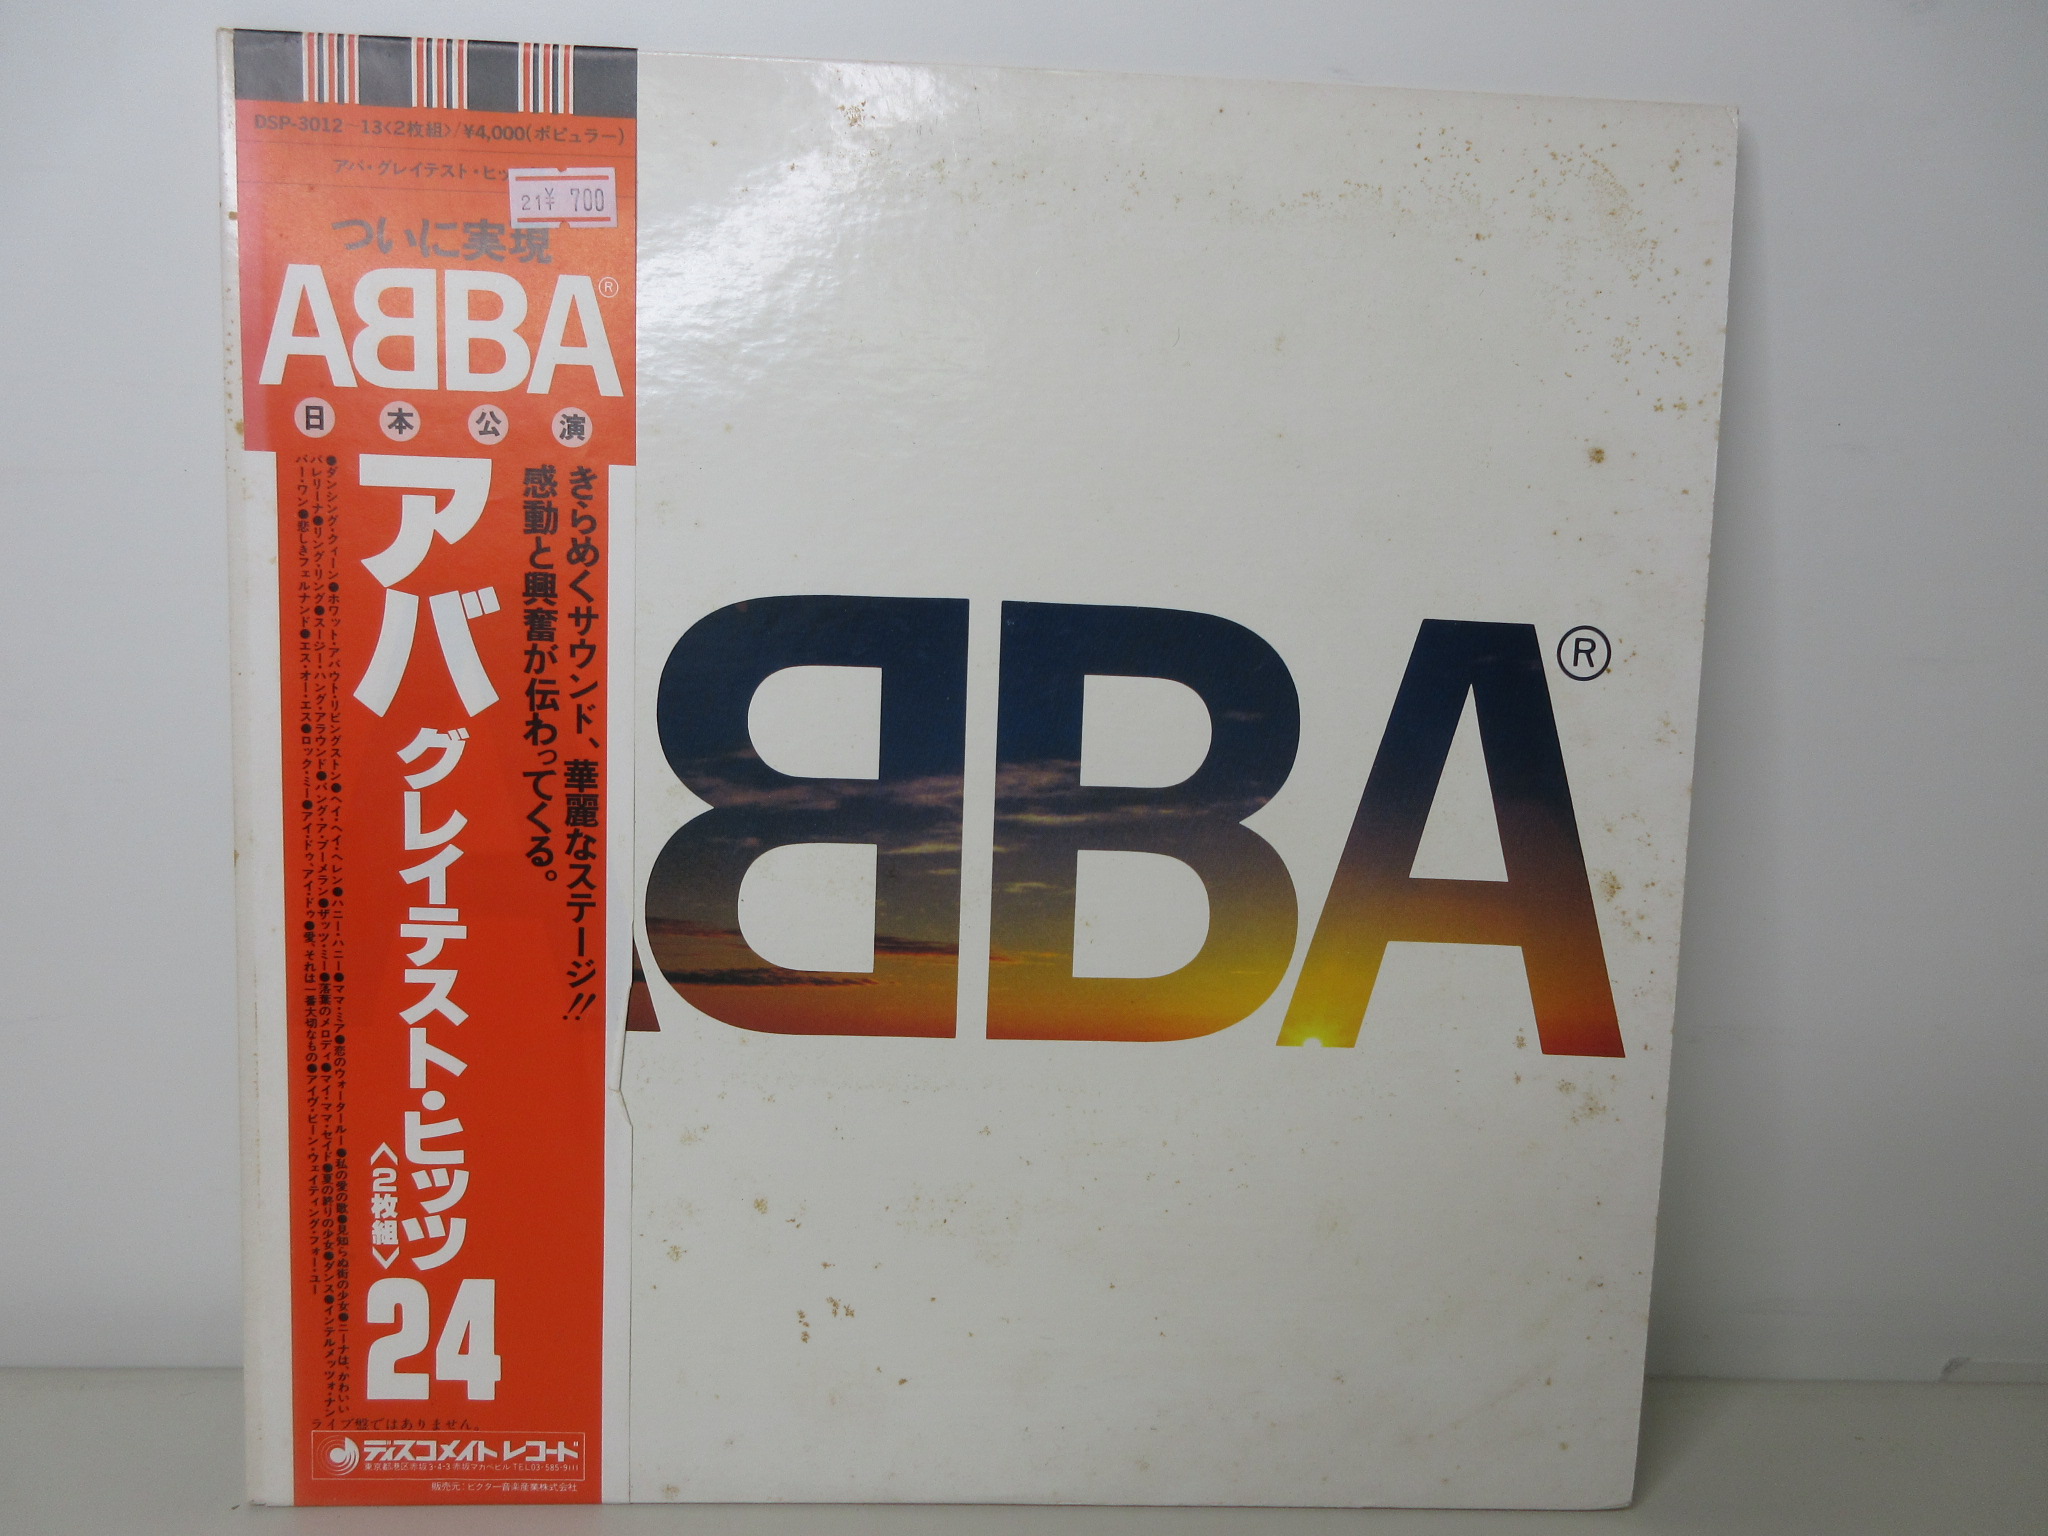 2LP  ABBA   ABBA's Greatest Hits 24  DSP-3012~13